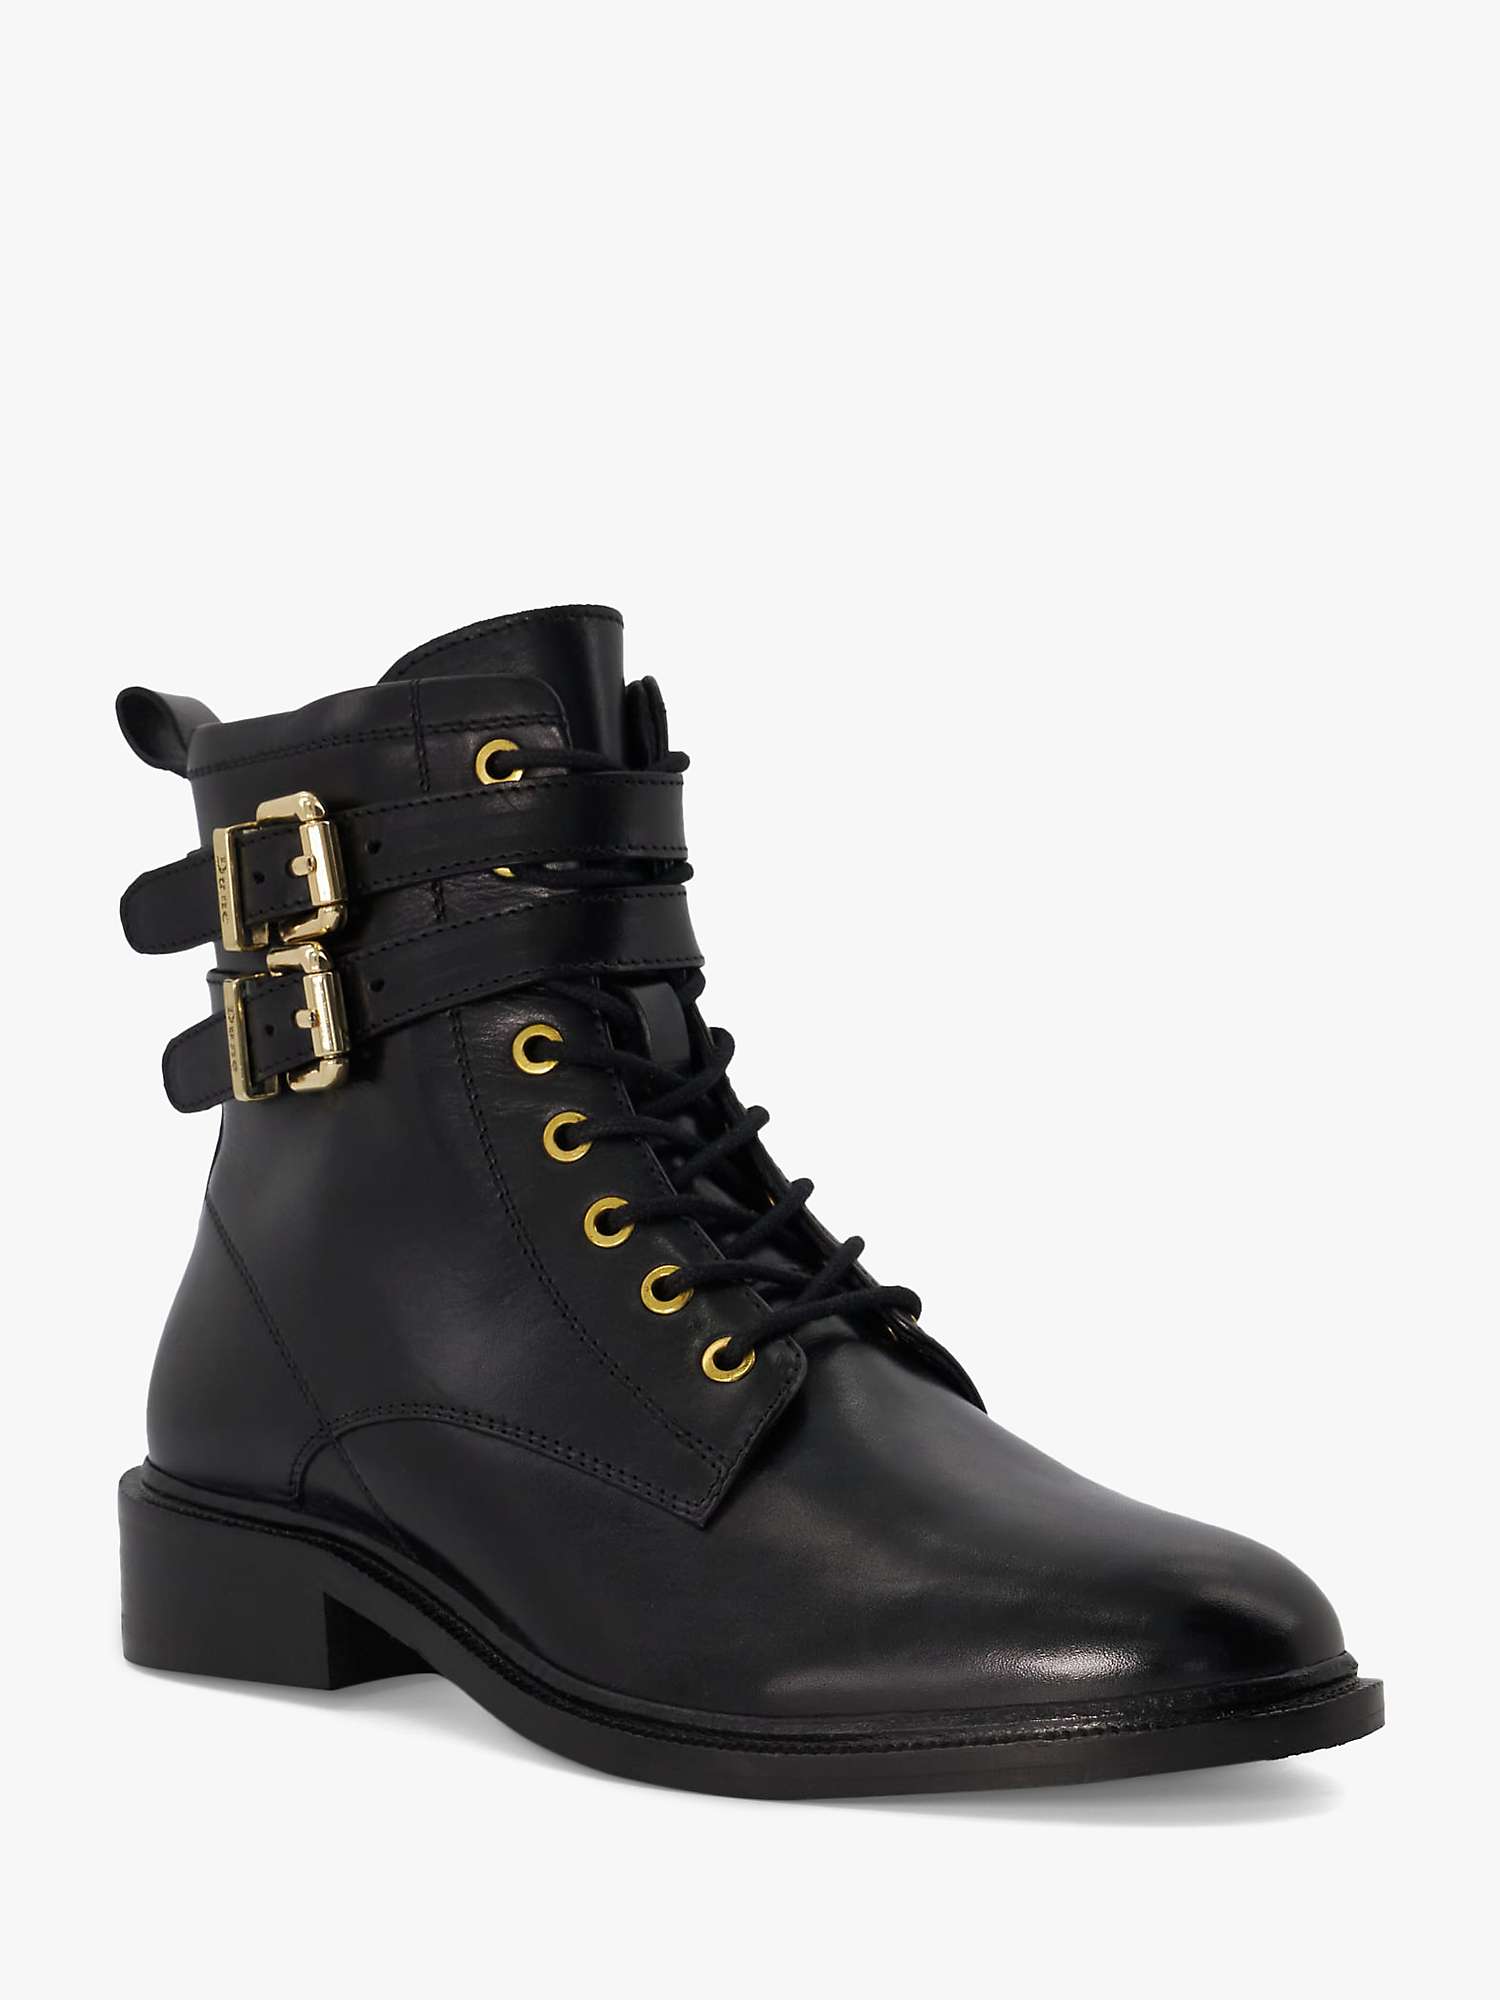 Buy Dune Phyllis Leather Double Buckle Lace Up Boots Online at johnlewis.com